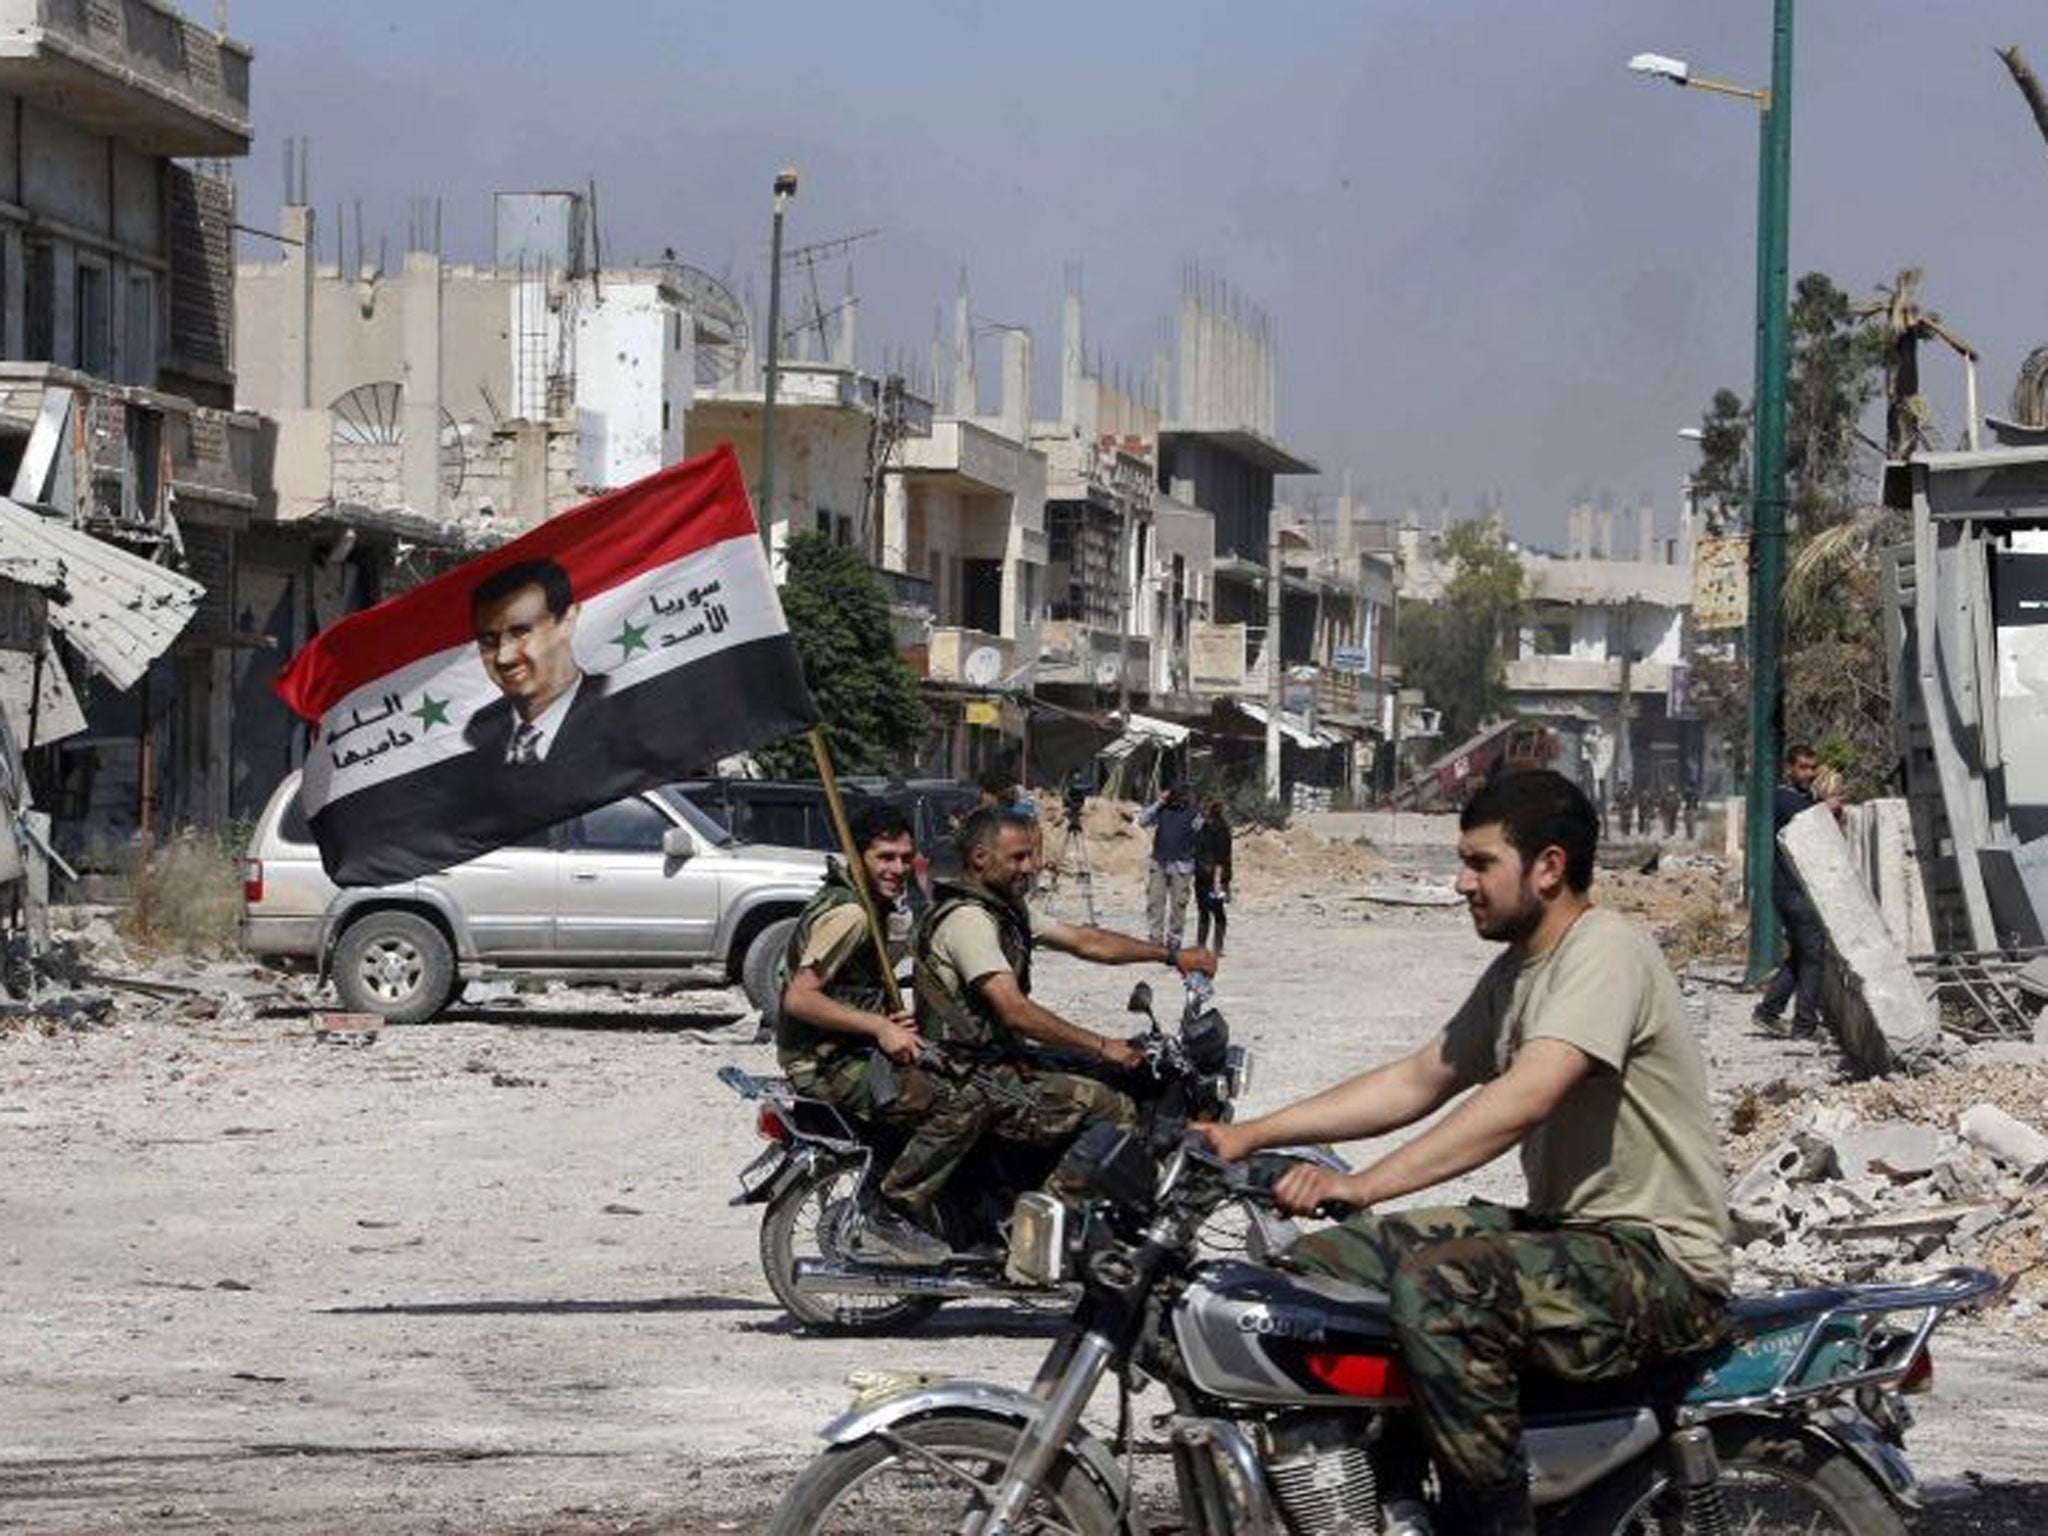 Flying the flag: Forces loyal to President Assad celebrate as the Syrian army take control in Qusair in June